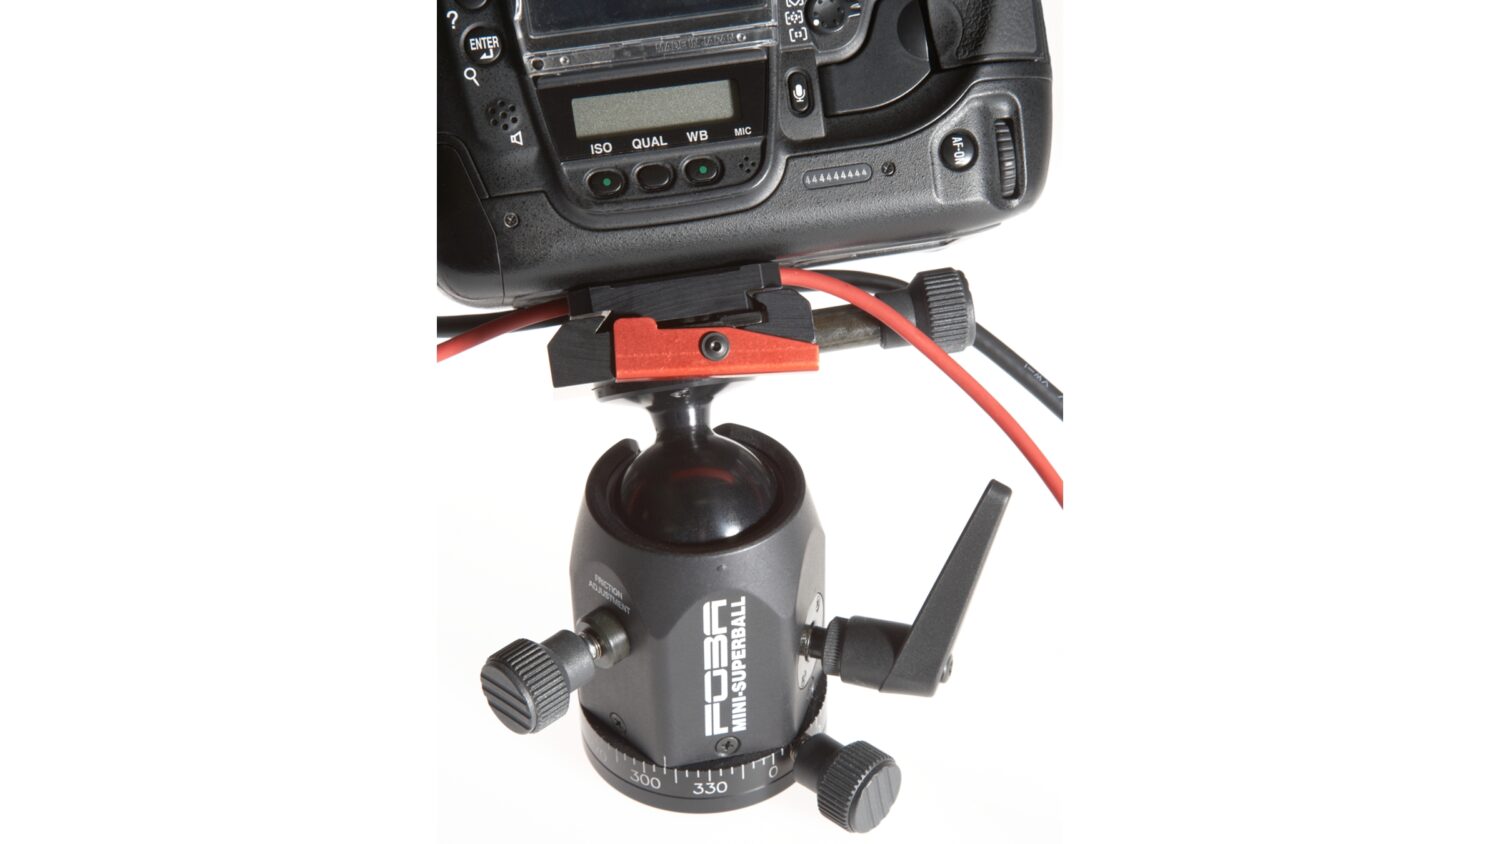 FOBA quick-release unit with cable management and camera mounted